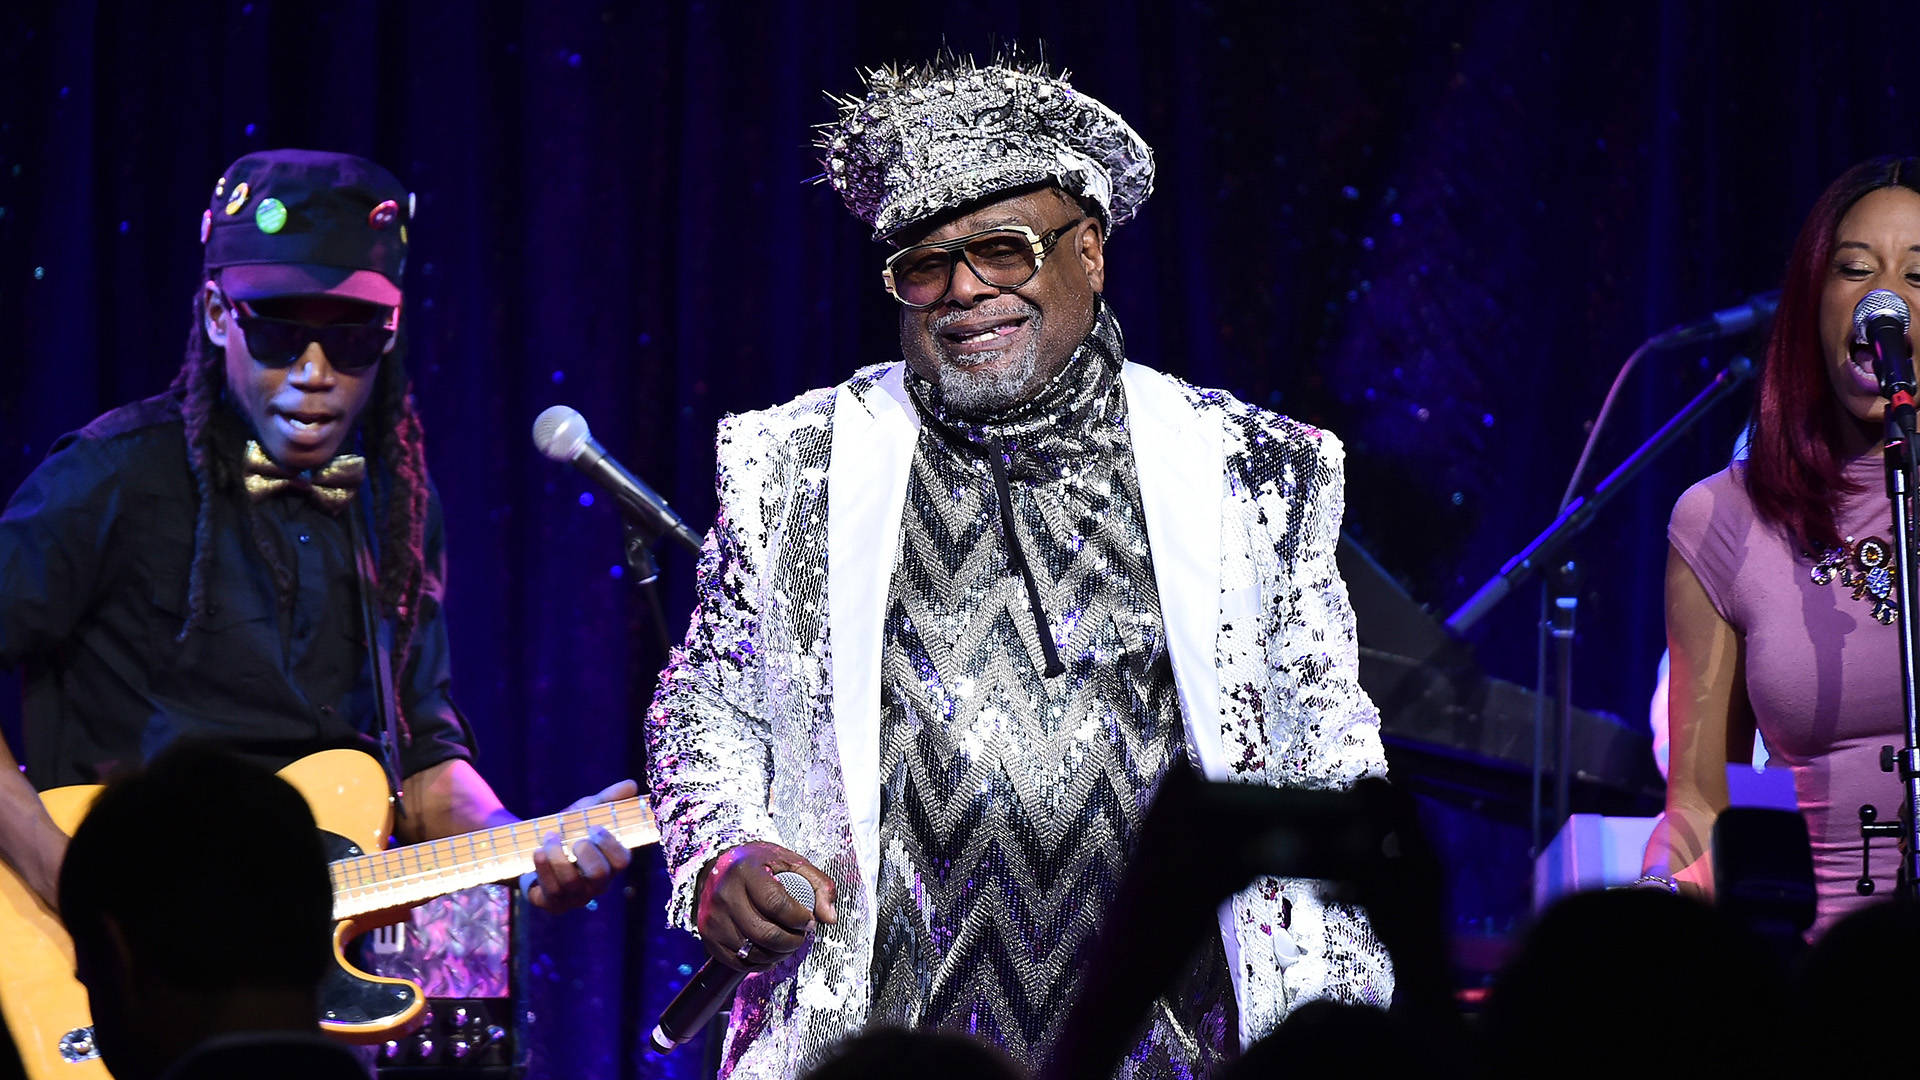 George Clinton performs at the 2017 SESAC Pop Awards on April 13, 2017 in New York City.  Theo Wargo/Getty Images for SESAC